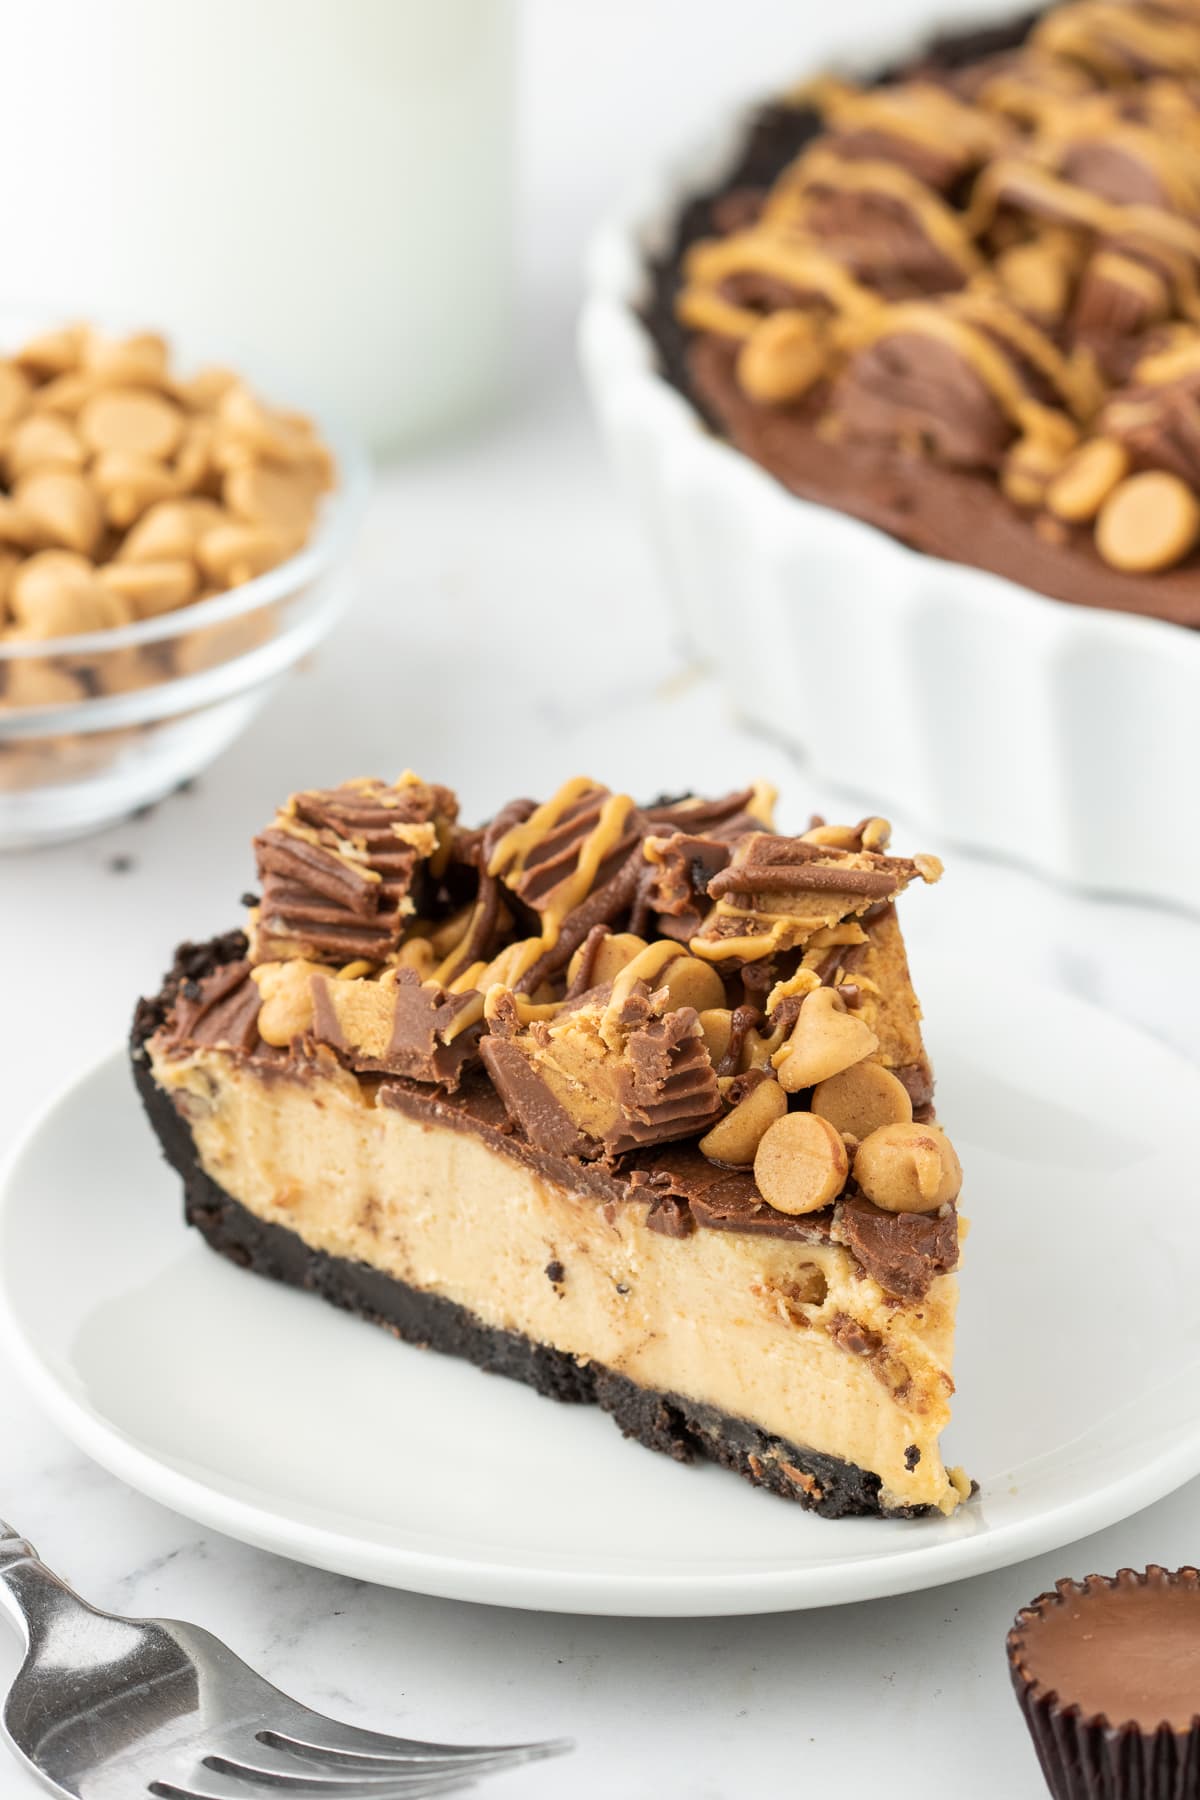 picture of a piece of pie with peanut butter cups on it and butterscotch chips, creamy filling, chocolate crust